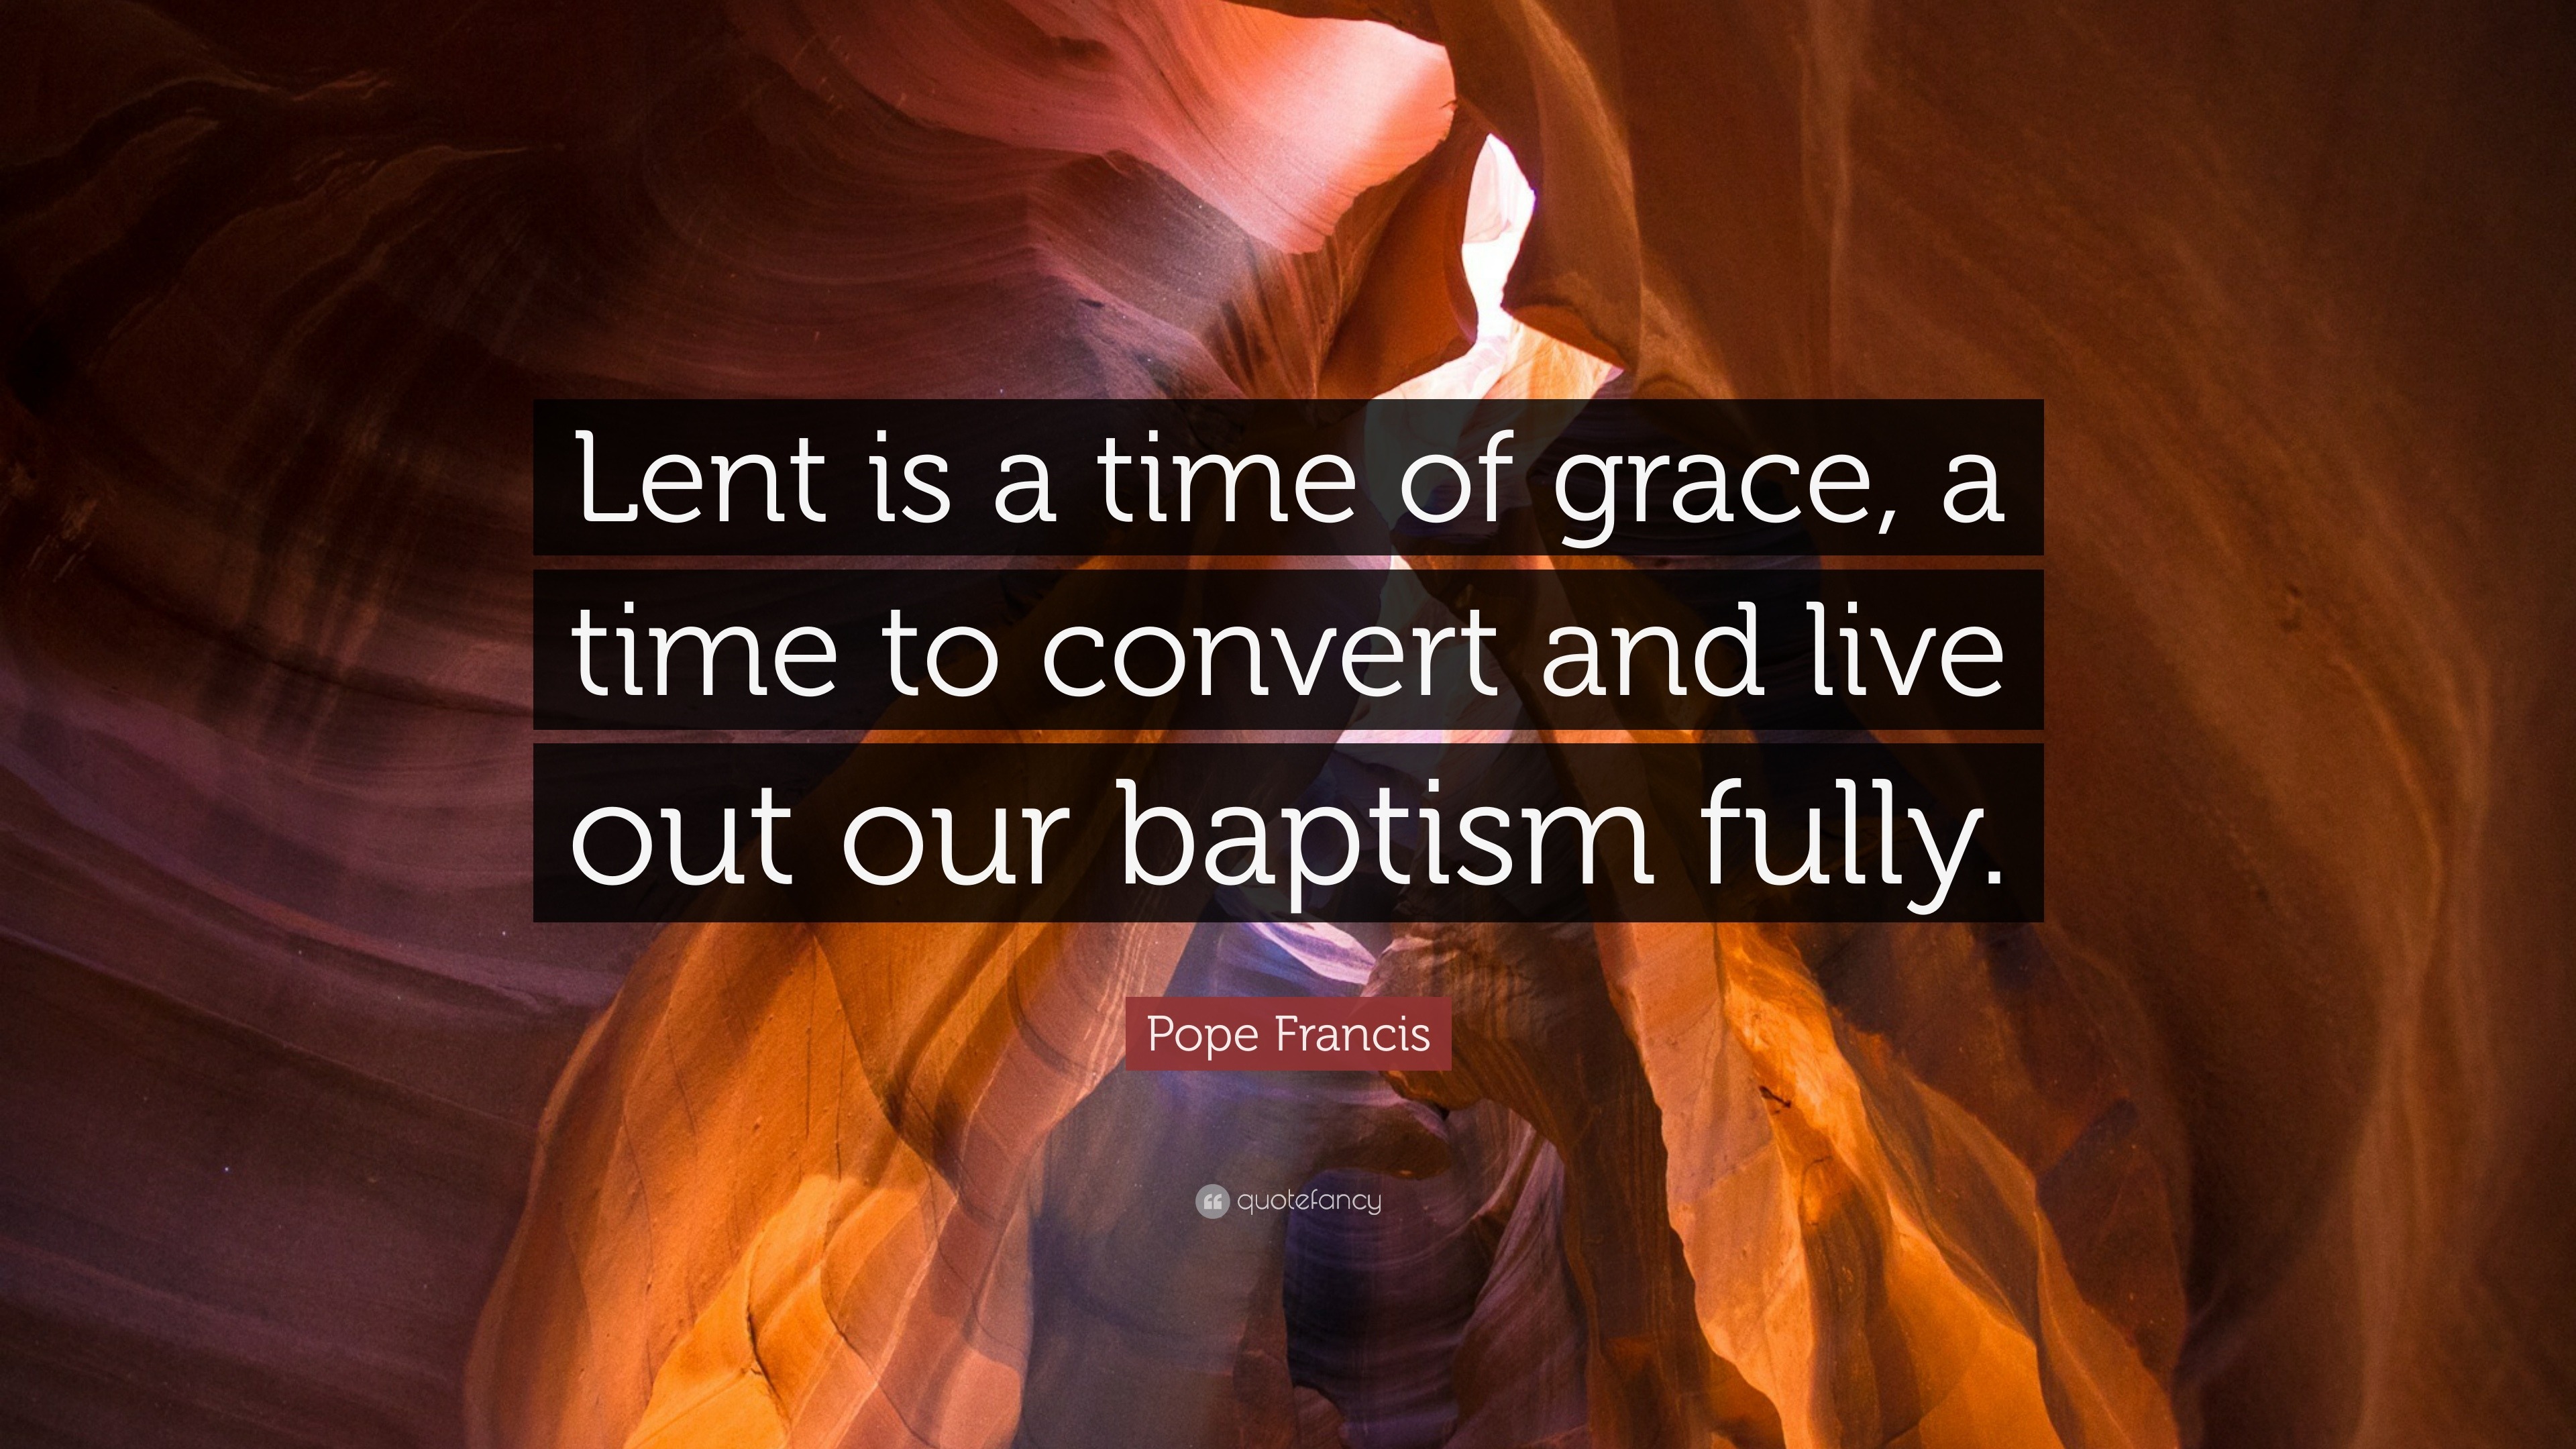 Pope Francis Quote “Lent is a time of grace, a time to convert and